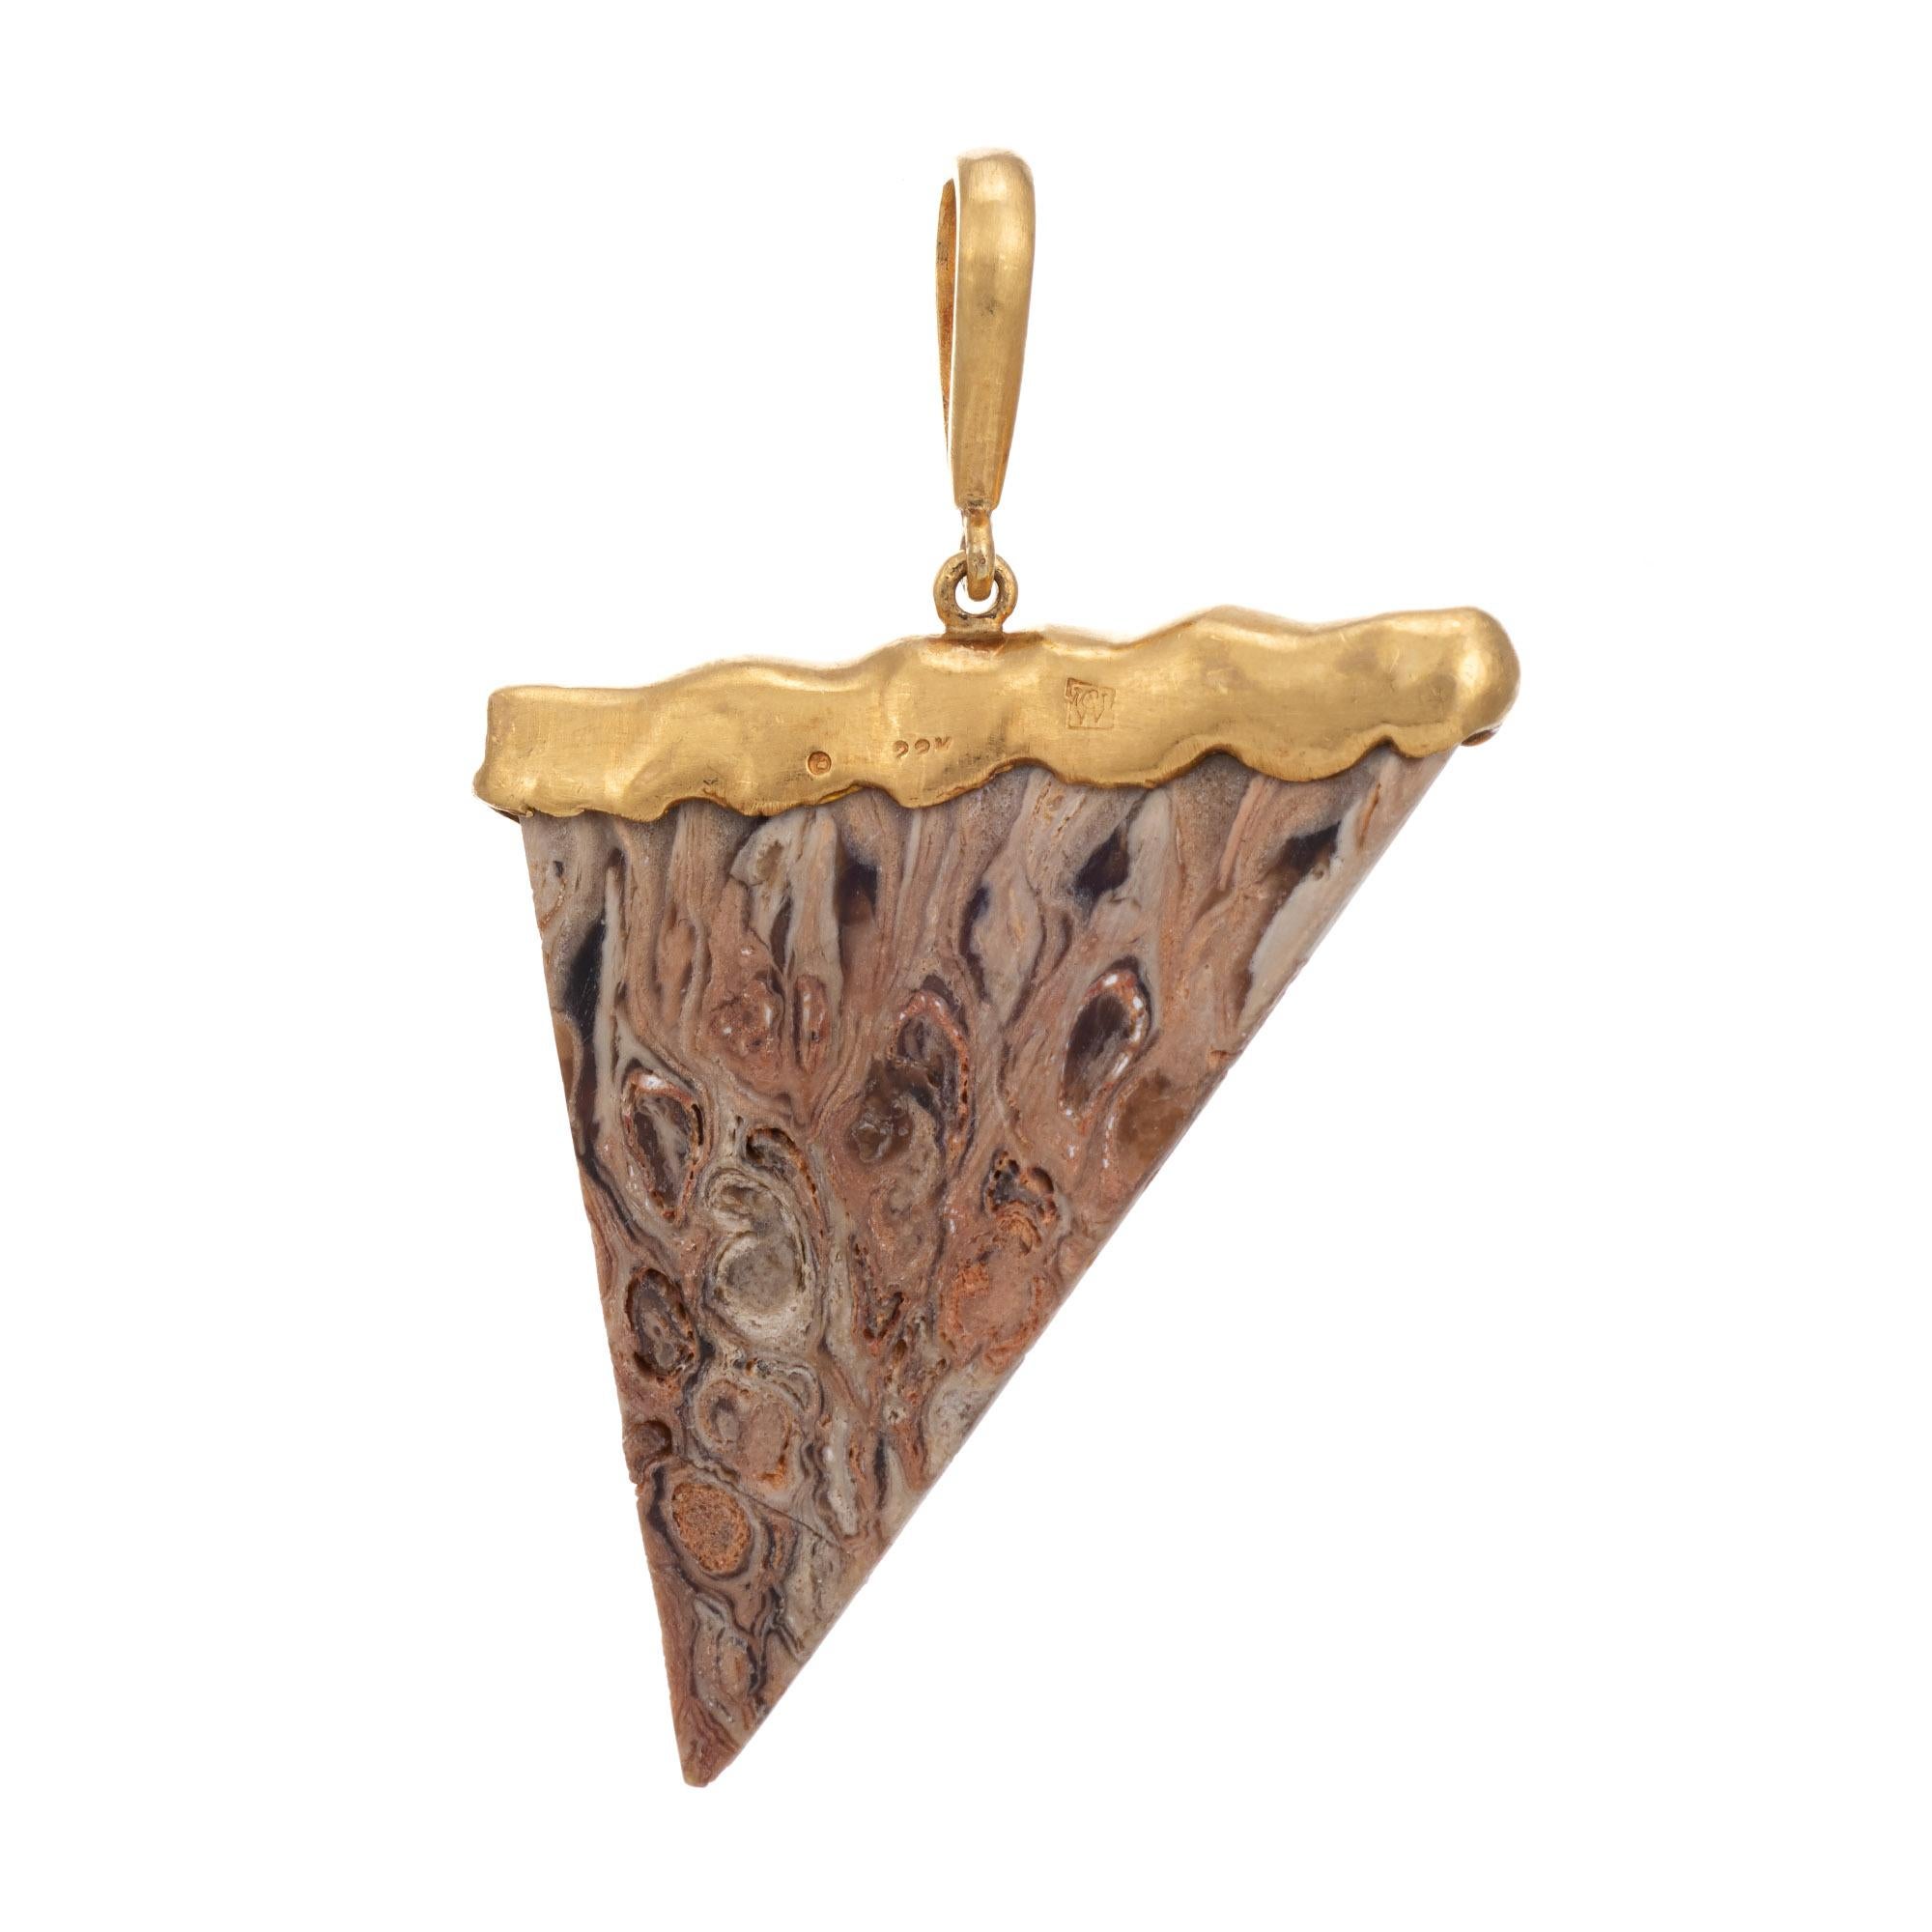 Finely detailed pre owned Cathy Waterman agate pendant crafted in 22k yellow gold. 

Agate measures 25mm (in very good condition and free of cracks or chips). 

The beautiful pendant is set with agate in a 22k yellow gold setting. Cathy Waterman